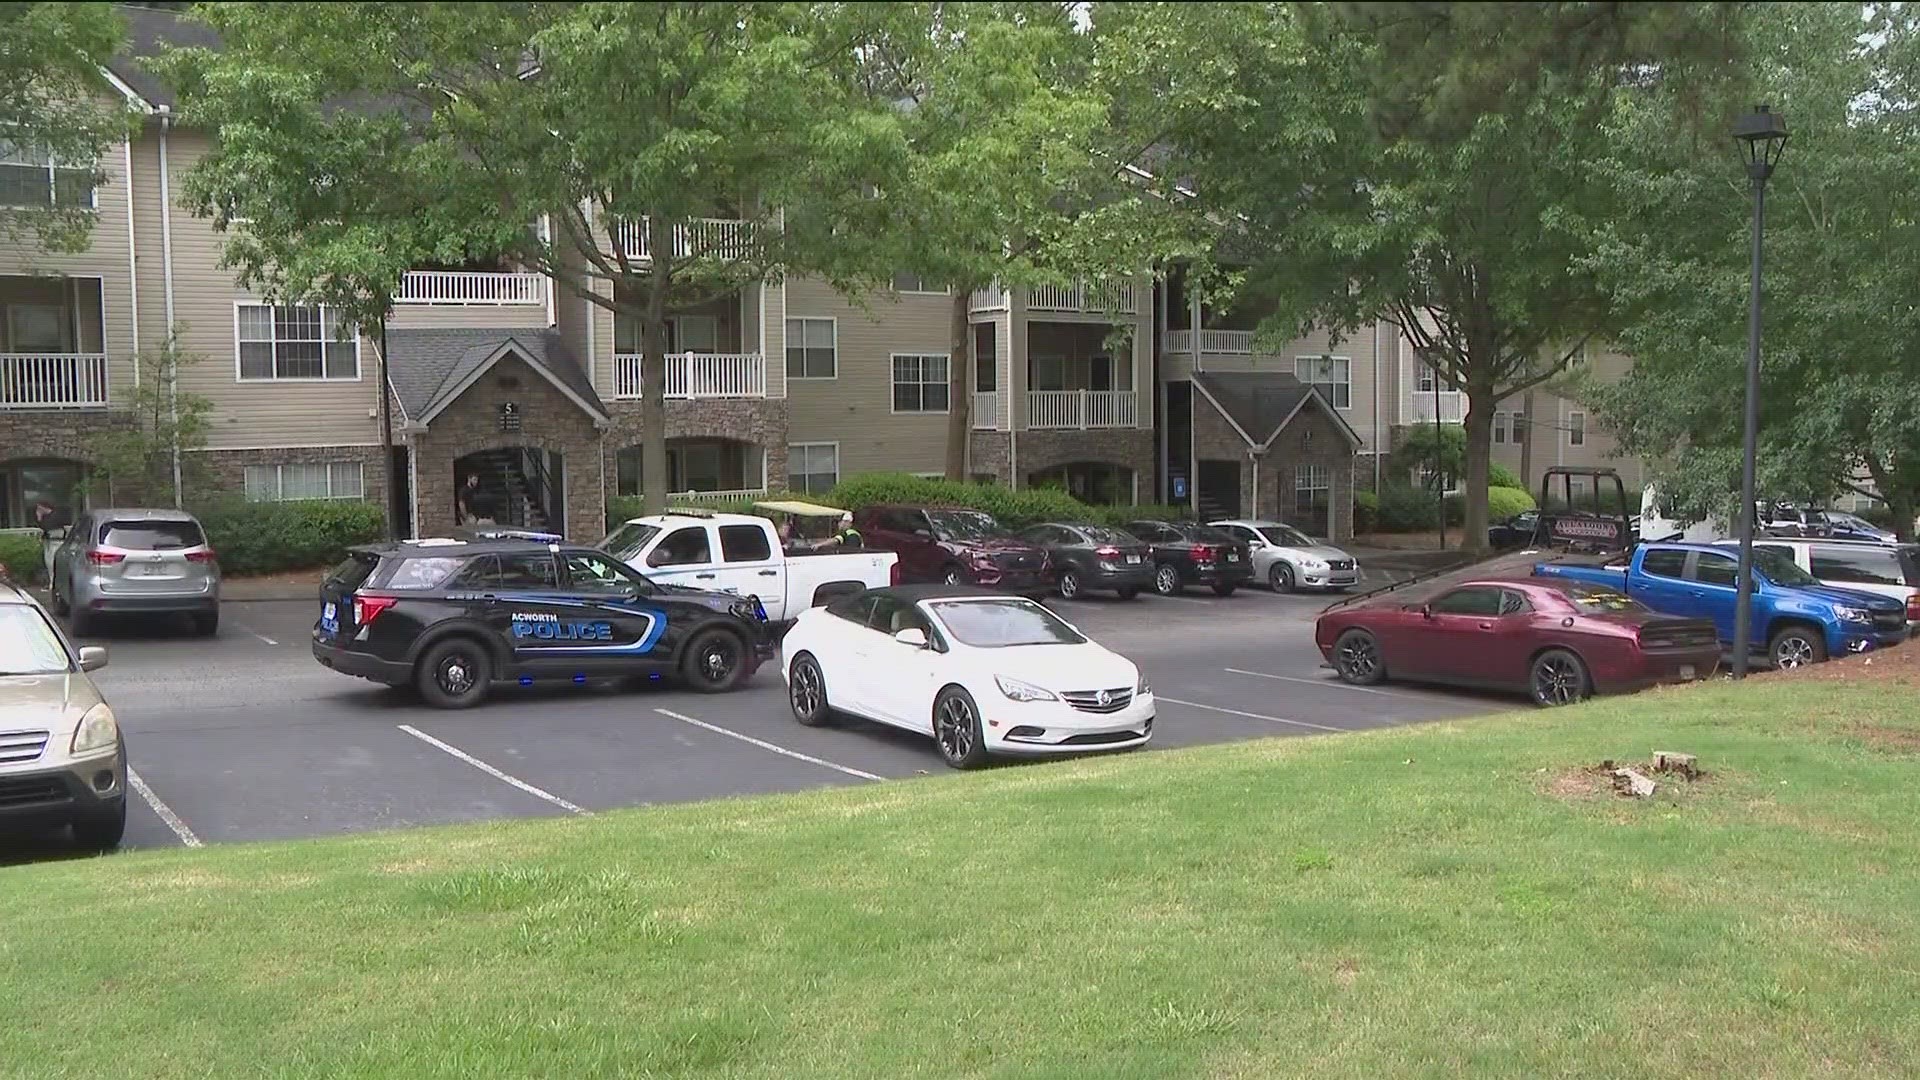 Officers responded to an address on Cobb Parkway that corresponds with the Walden Ridge Apartment Homes complex.